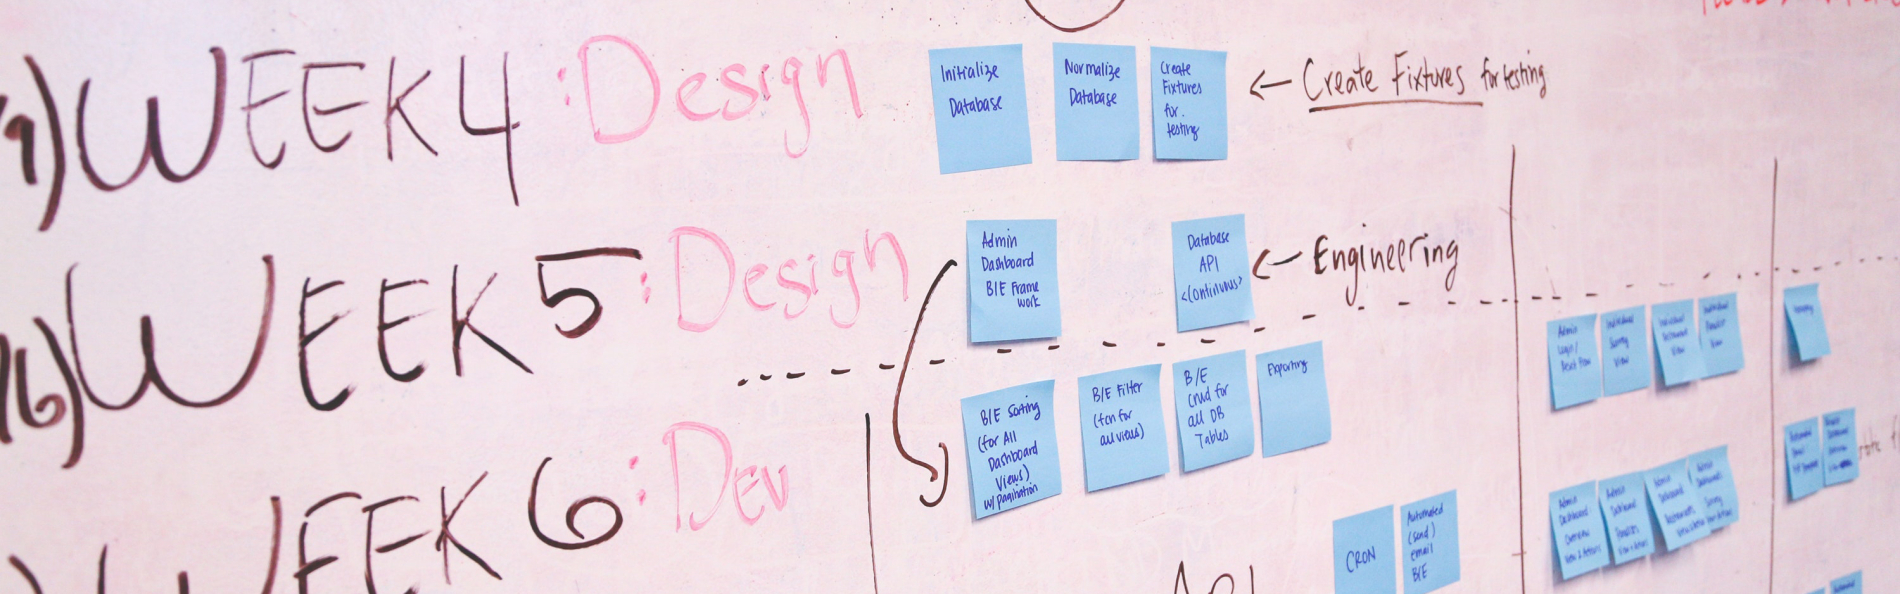 photo of post-it notes on whiteboard arranged in a project planning timeline